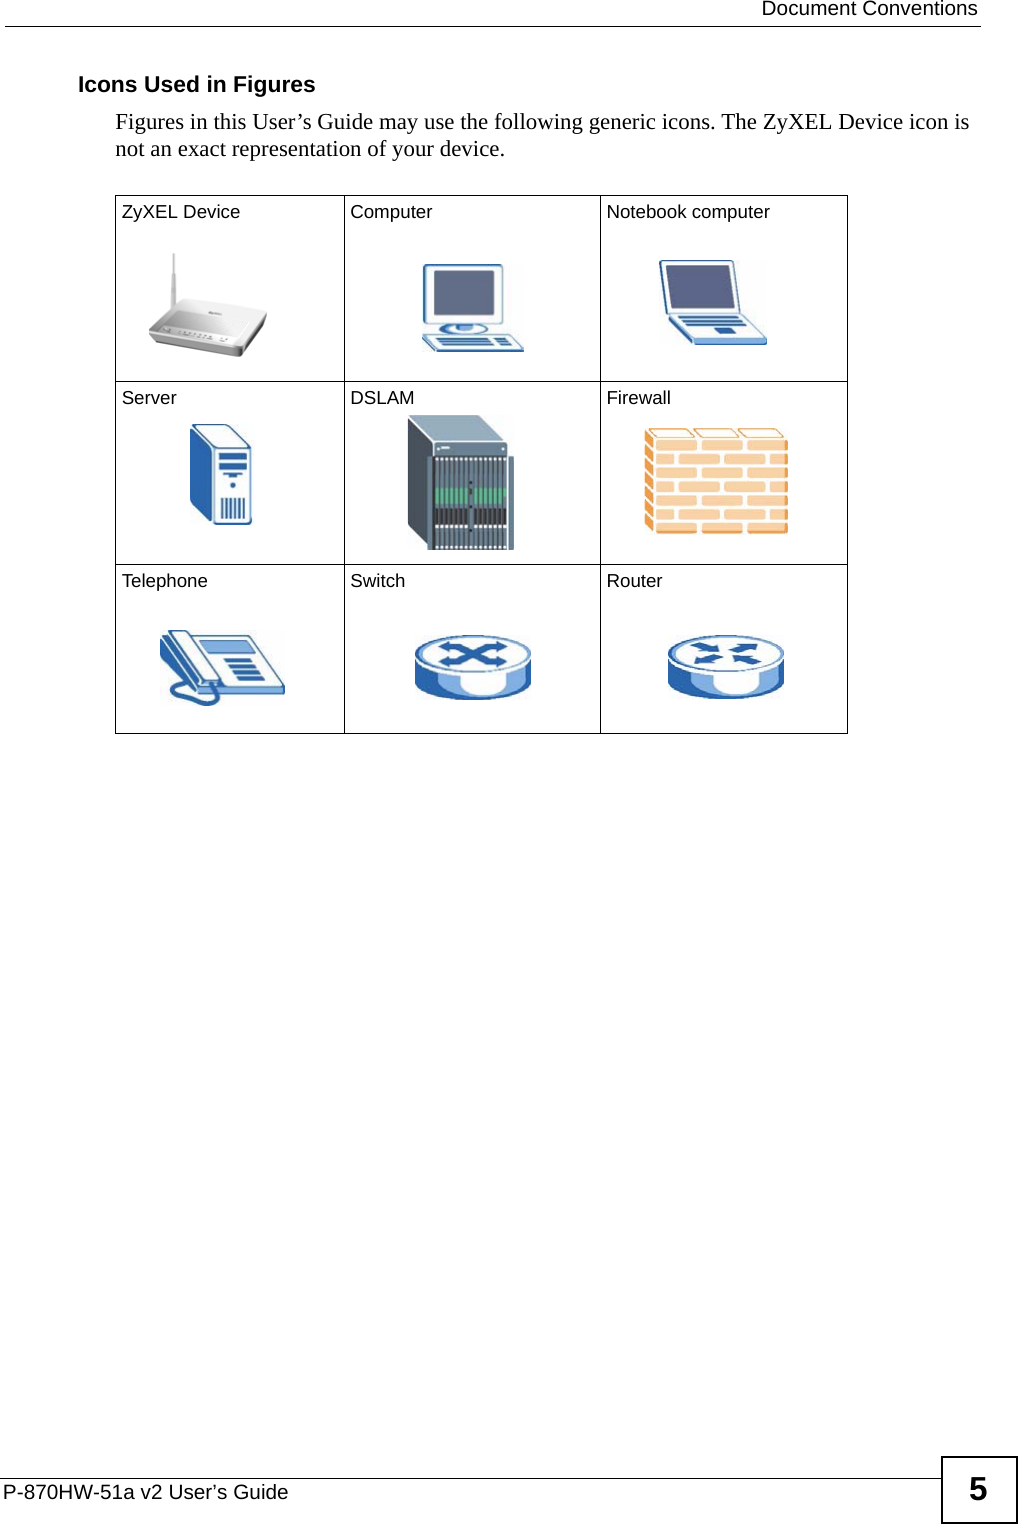  Document ConventionsP-870HW-51a v2 User’s Guide 5Icons Used in FiguresFigures in this User’s Guide may use the following generic icons. The ZyXEL Device icon is not an exact representation of your device.ZyXEL Device Computer Notebook computerServer DSLAM FirewallTelephone Switch Router